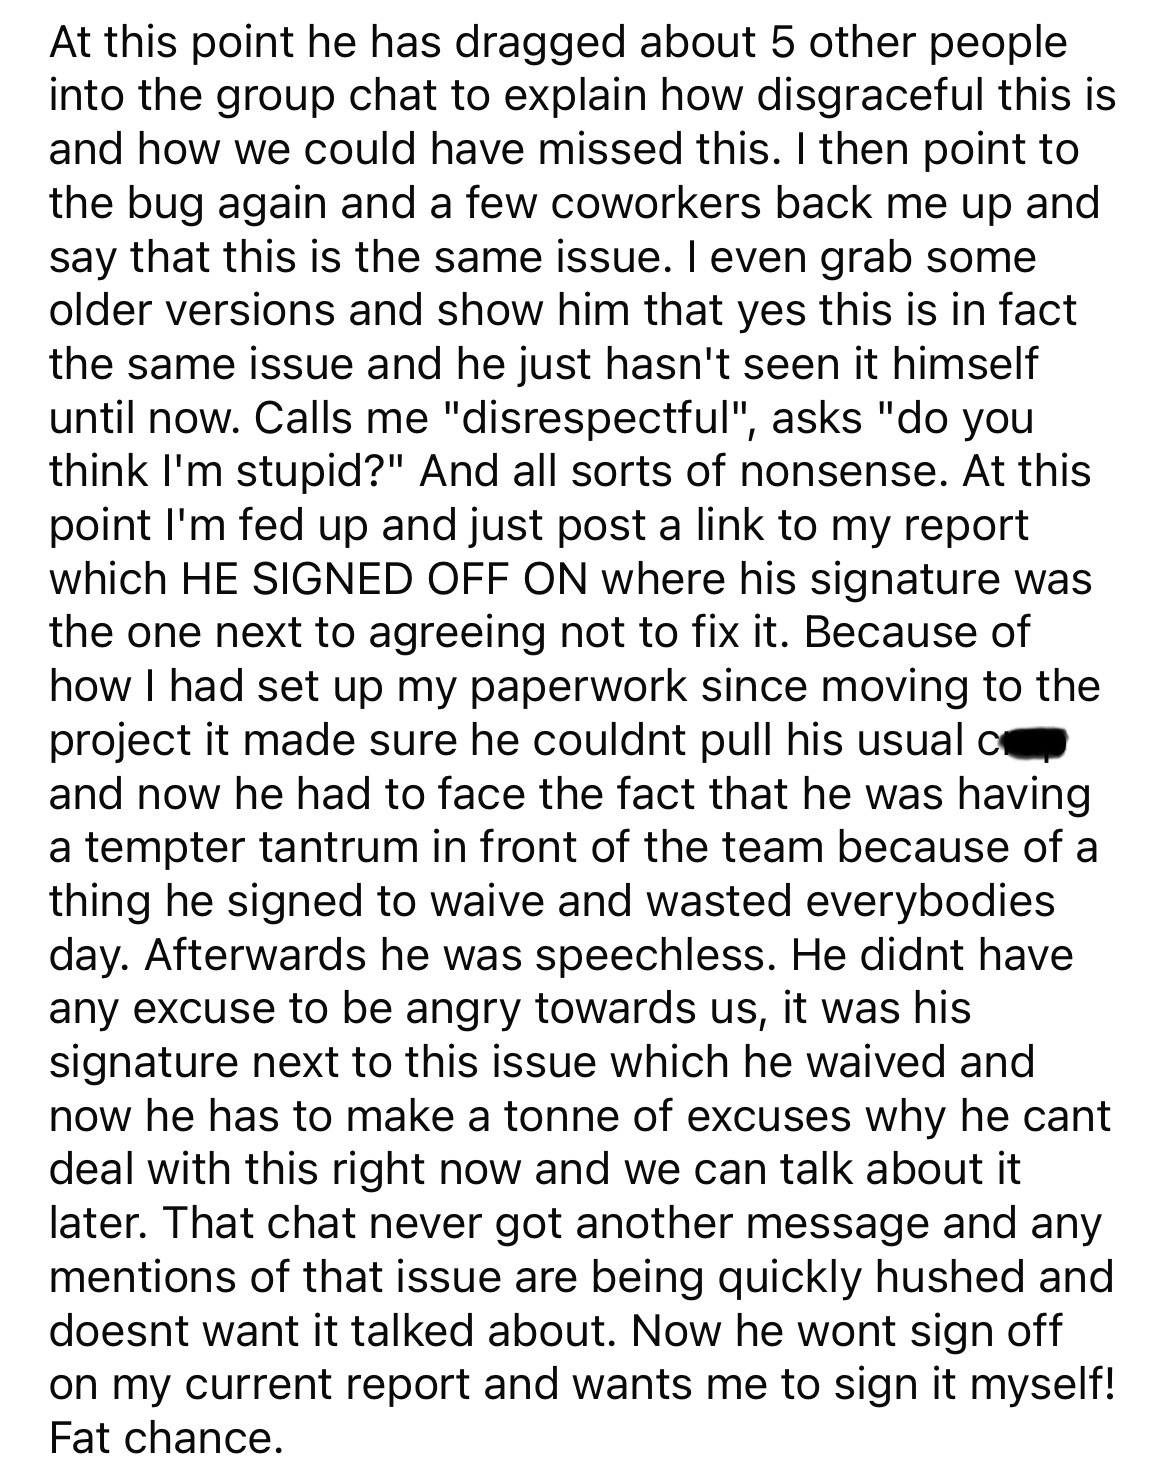 document - At this point he has dragged about 5 other people into the group chat to explain how disgraceful this is and how we could have missed this. I then point to the bug again and a few coworkers back me up and say that this is the same issue. I even